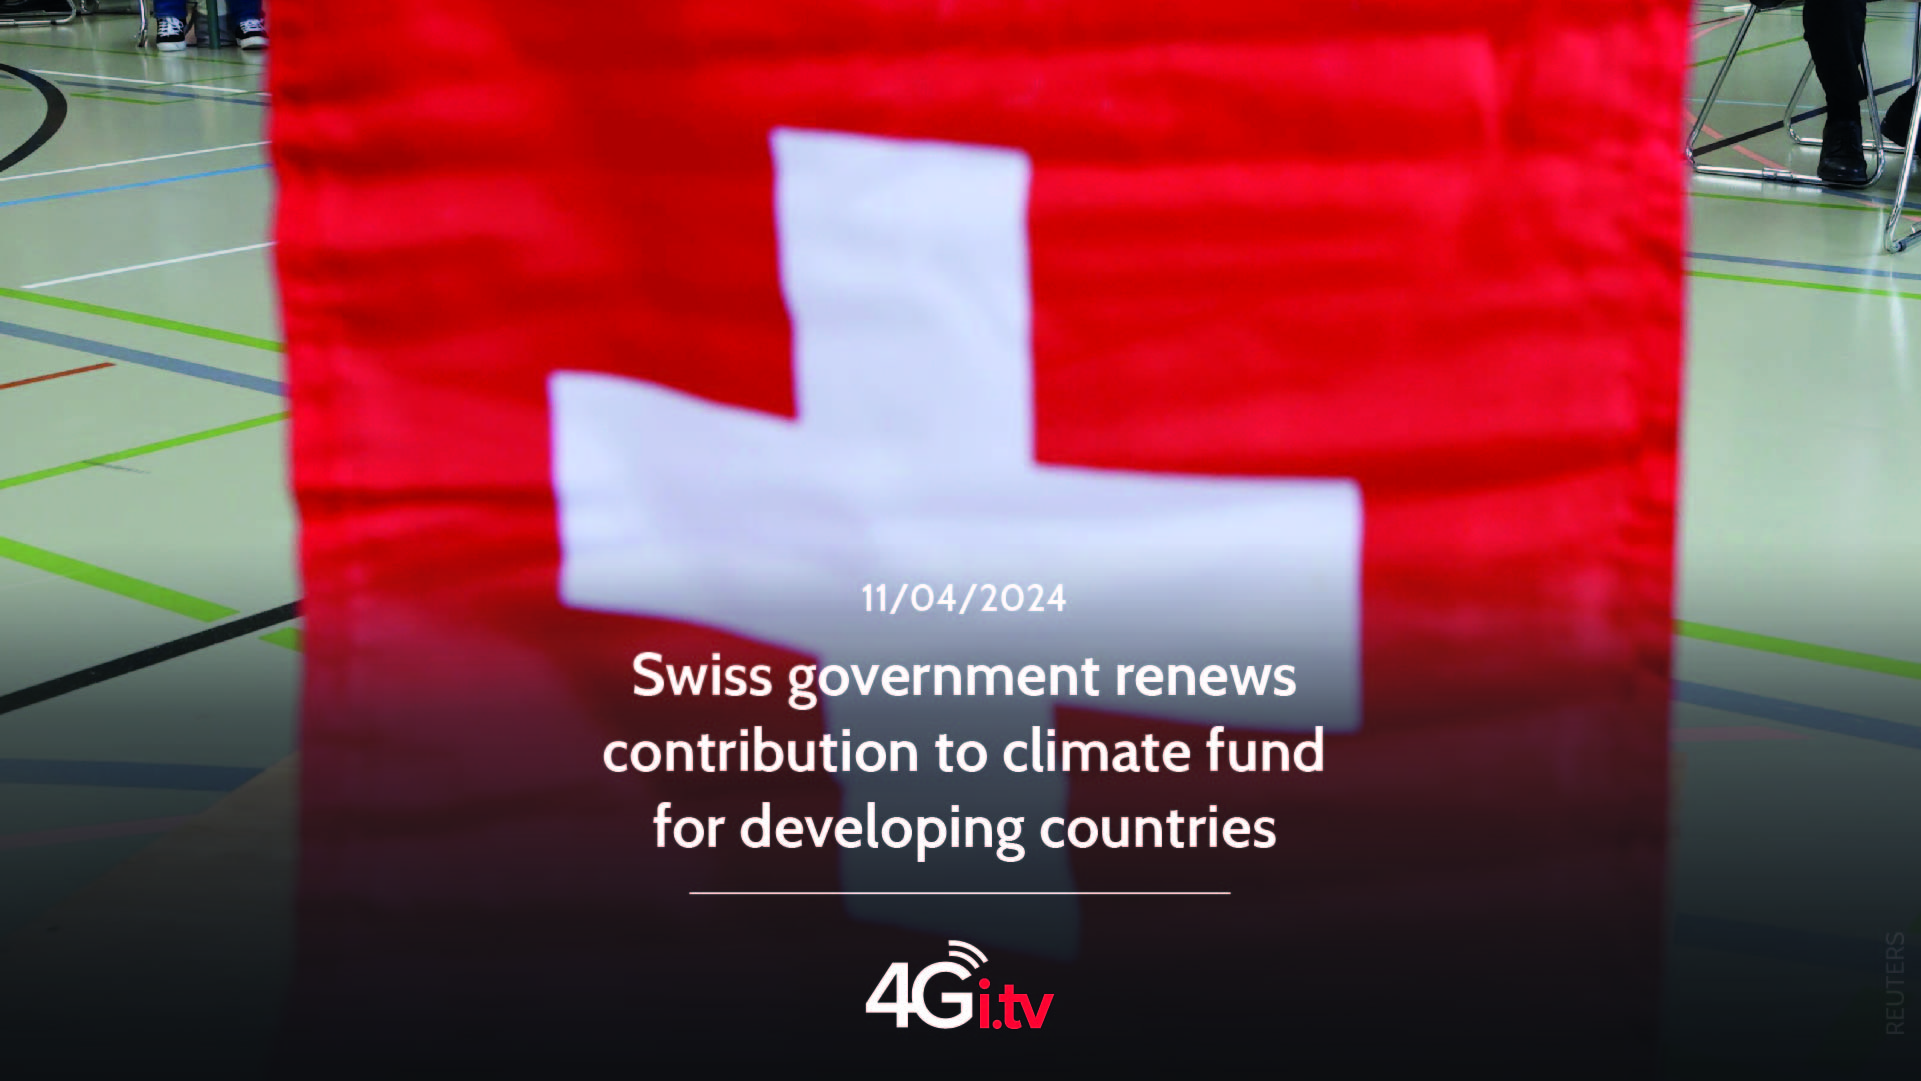 Lee más sobre el artículo Swiss government renews contribution to climate fund for developing countries